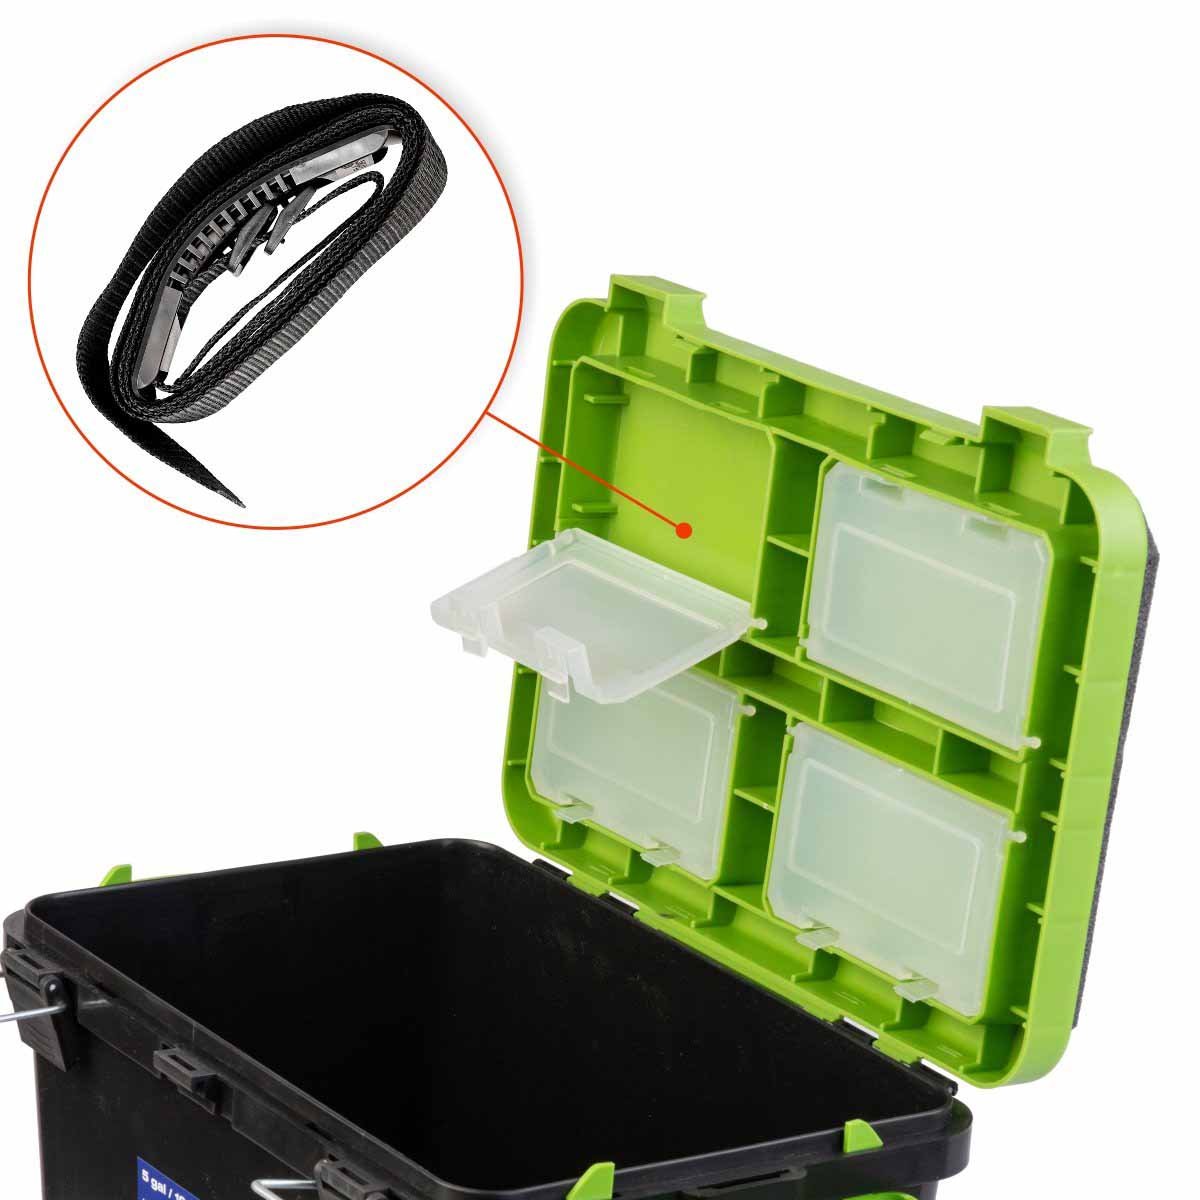 FishBox Large 5 gal Box for Ice Fishing is equipped with adjustable shoulder strap